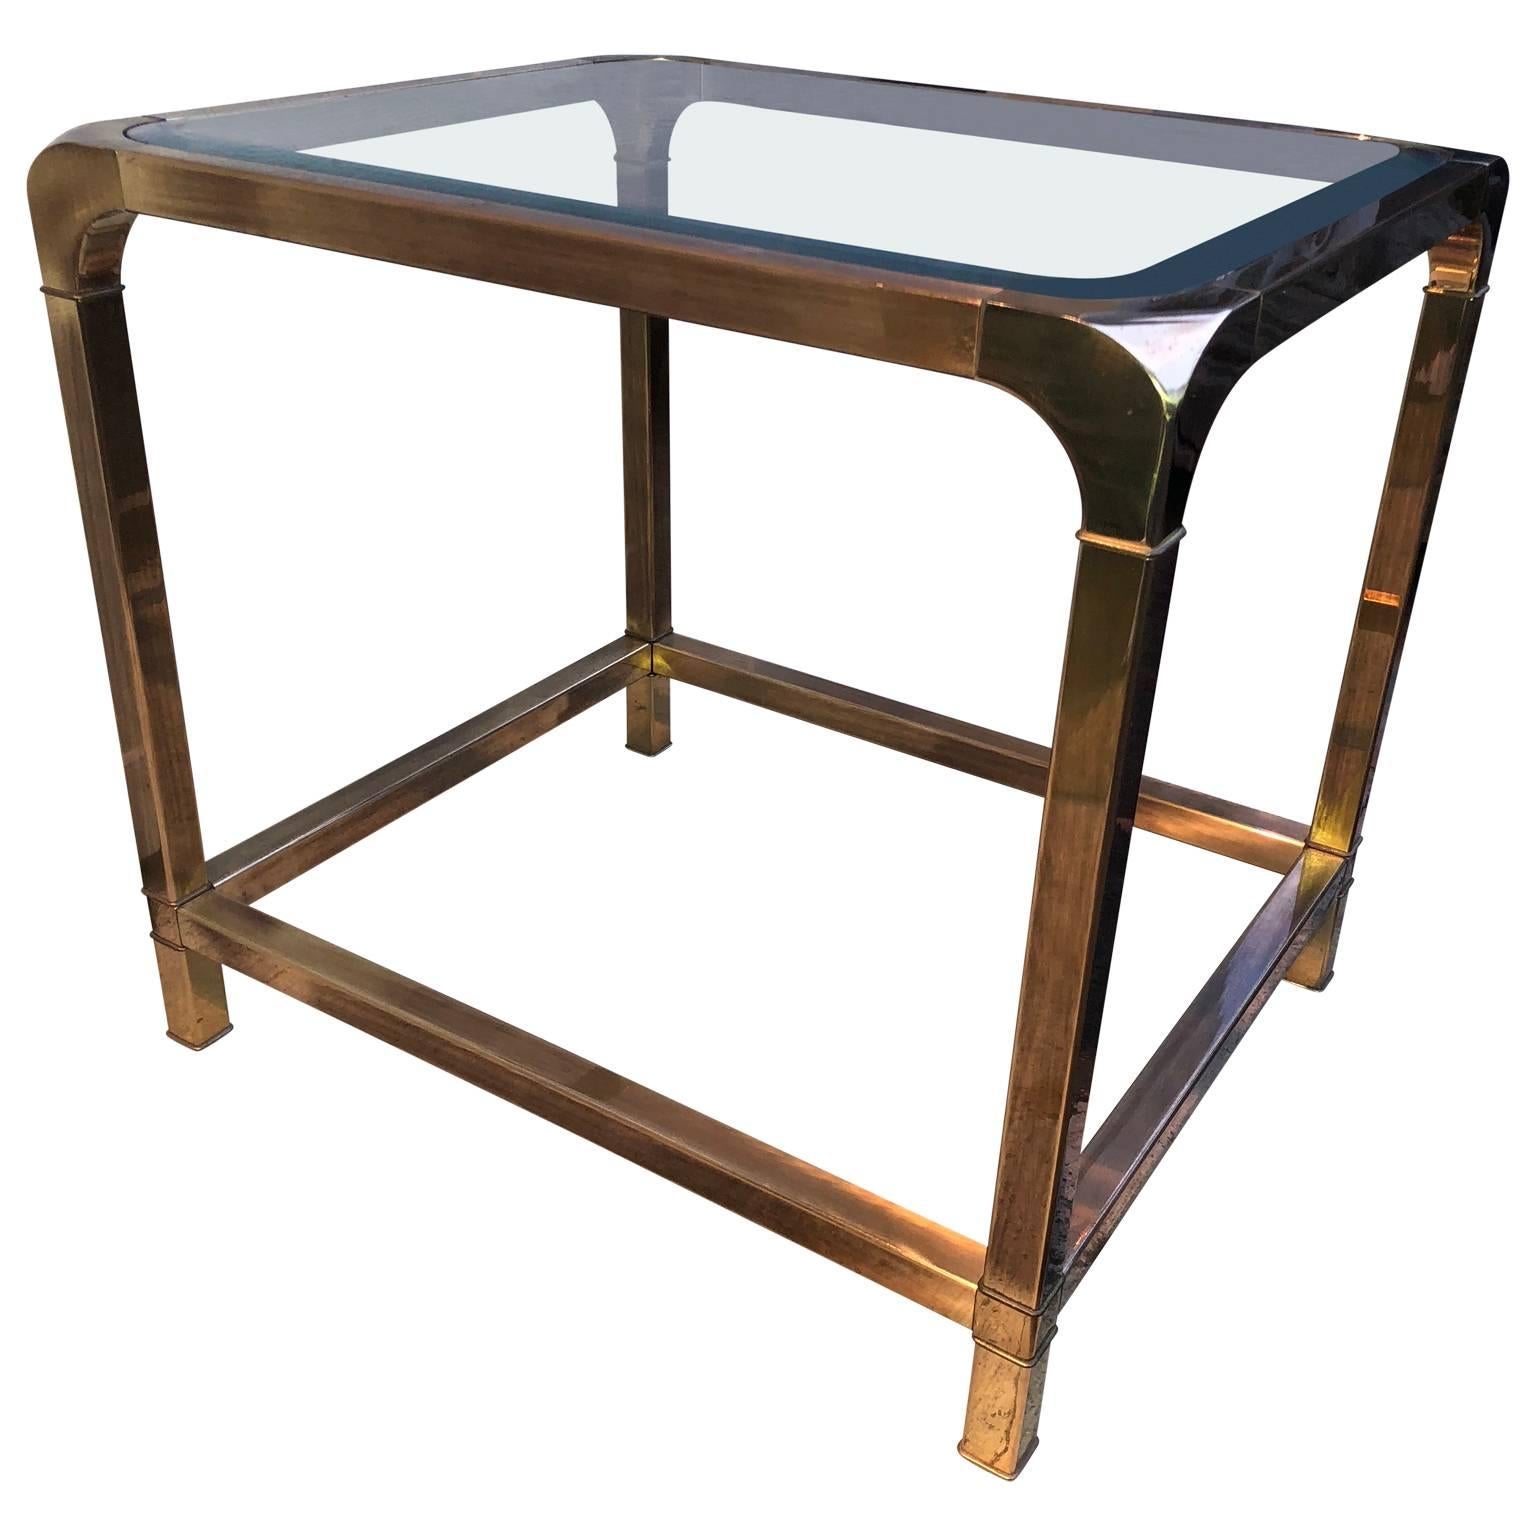 Mid-Century Modern brass Mastercraft side end table with bevelled glass top

$125 flat rate front door delivery includes Washington DC metro, Baltimore and Philadelphia.